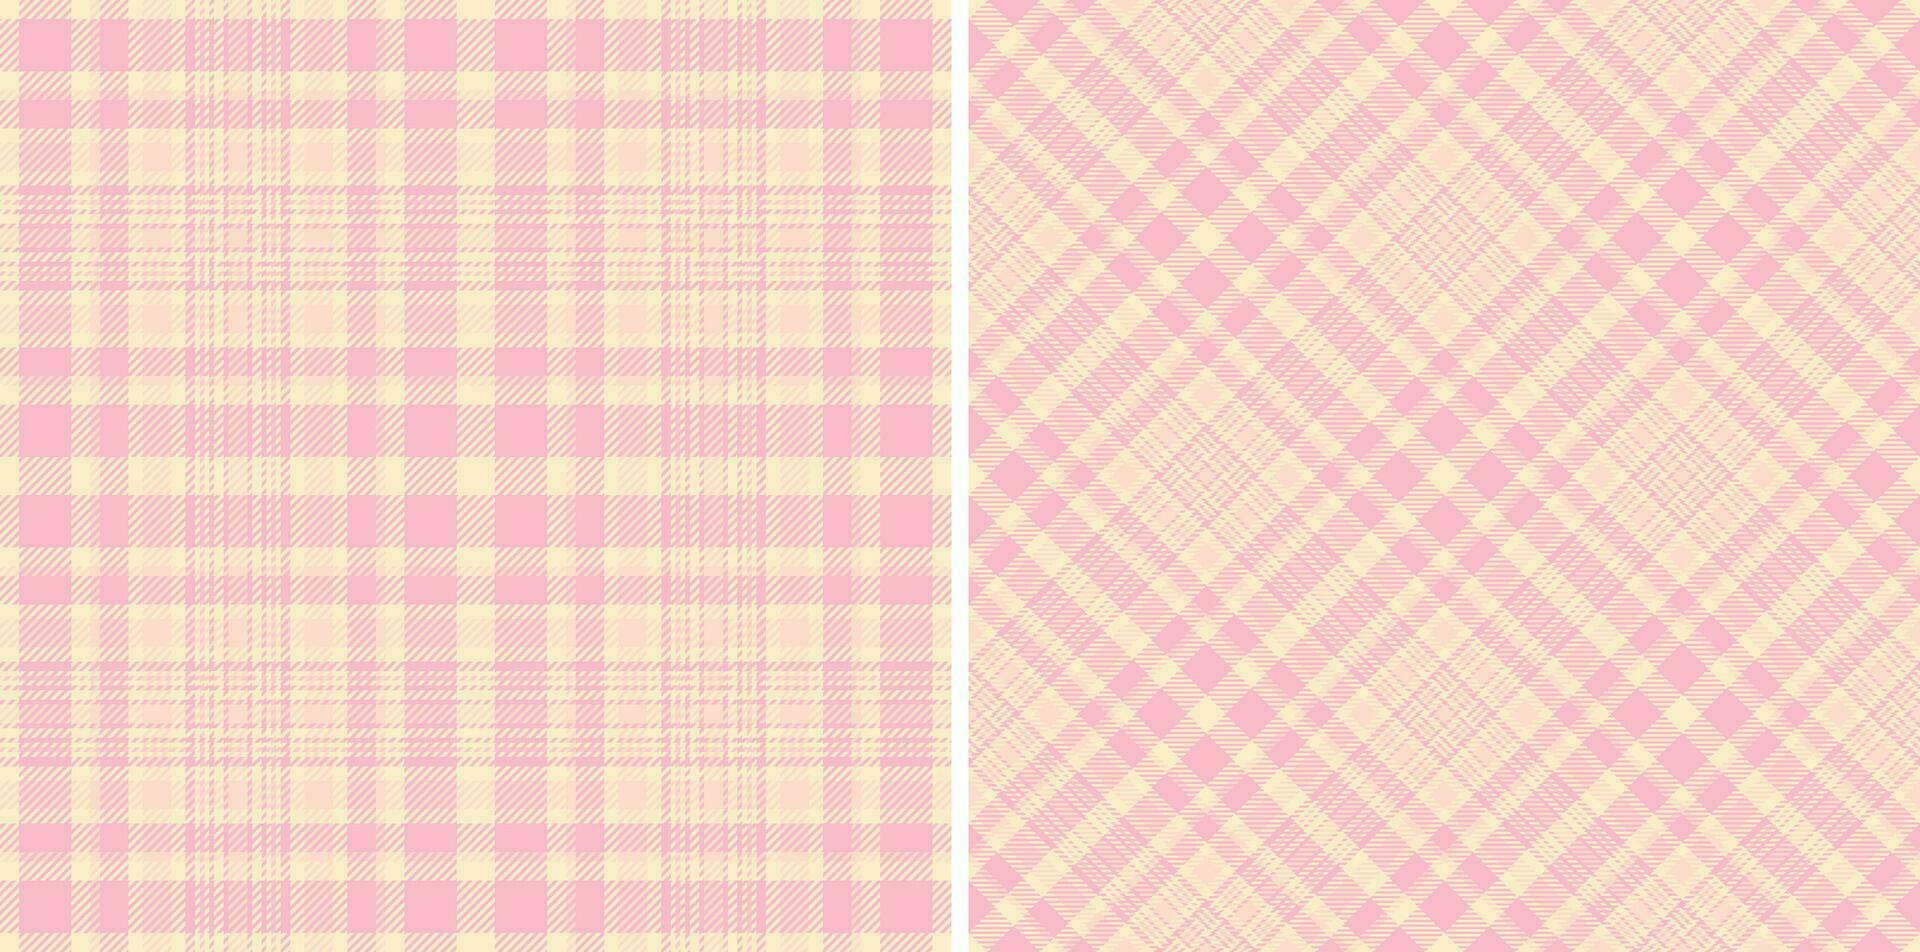 Tartan texture check of fabric pattern vector with a textile background seamless plaid.